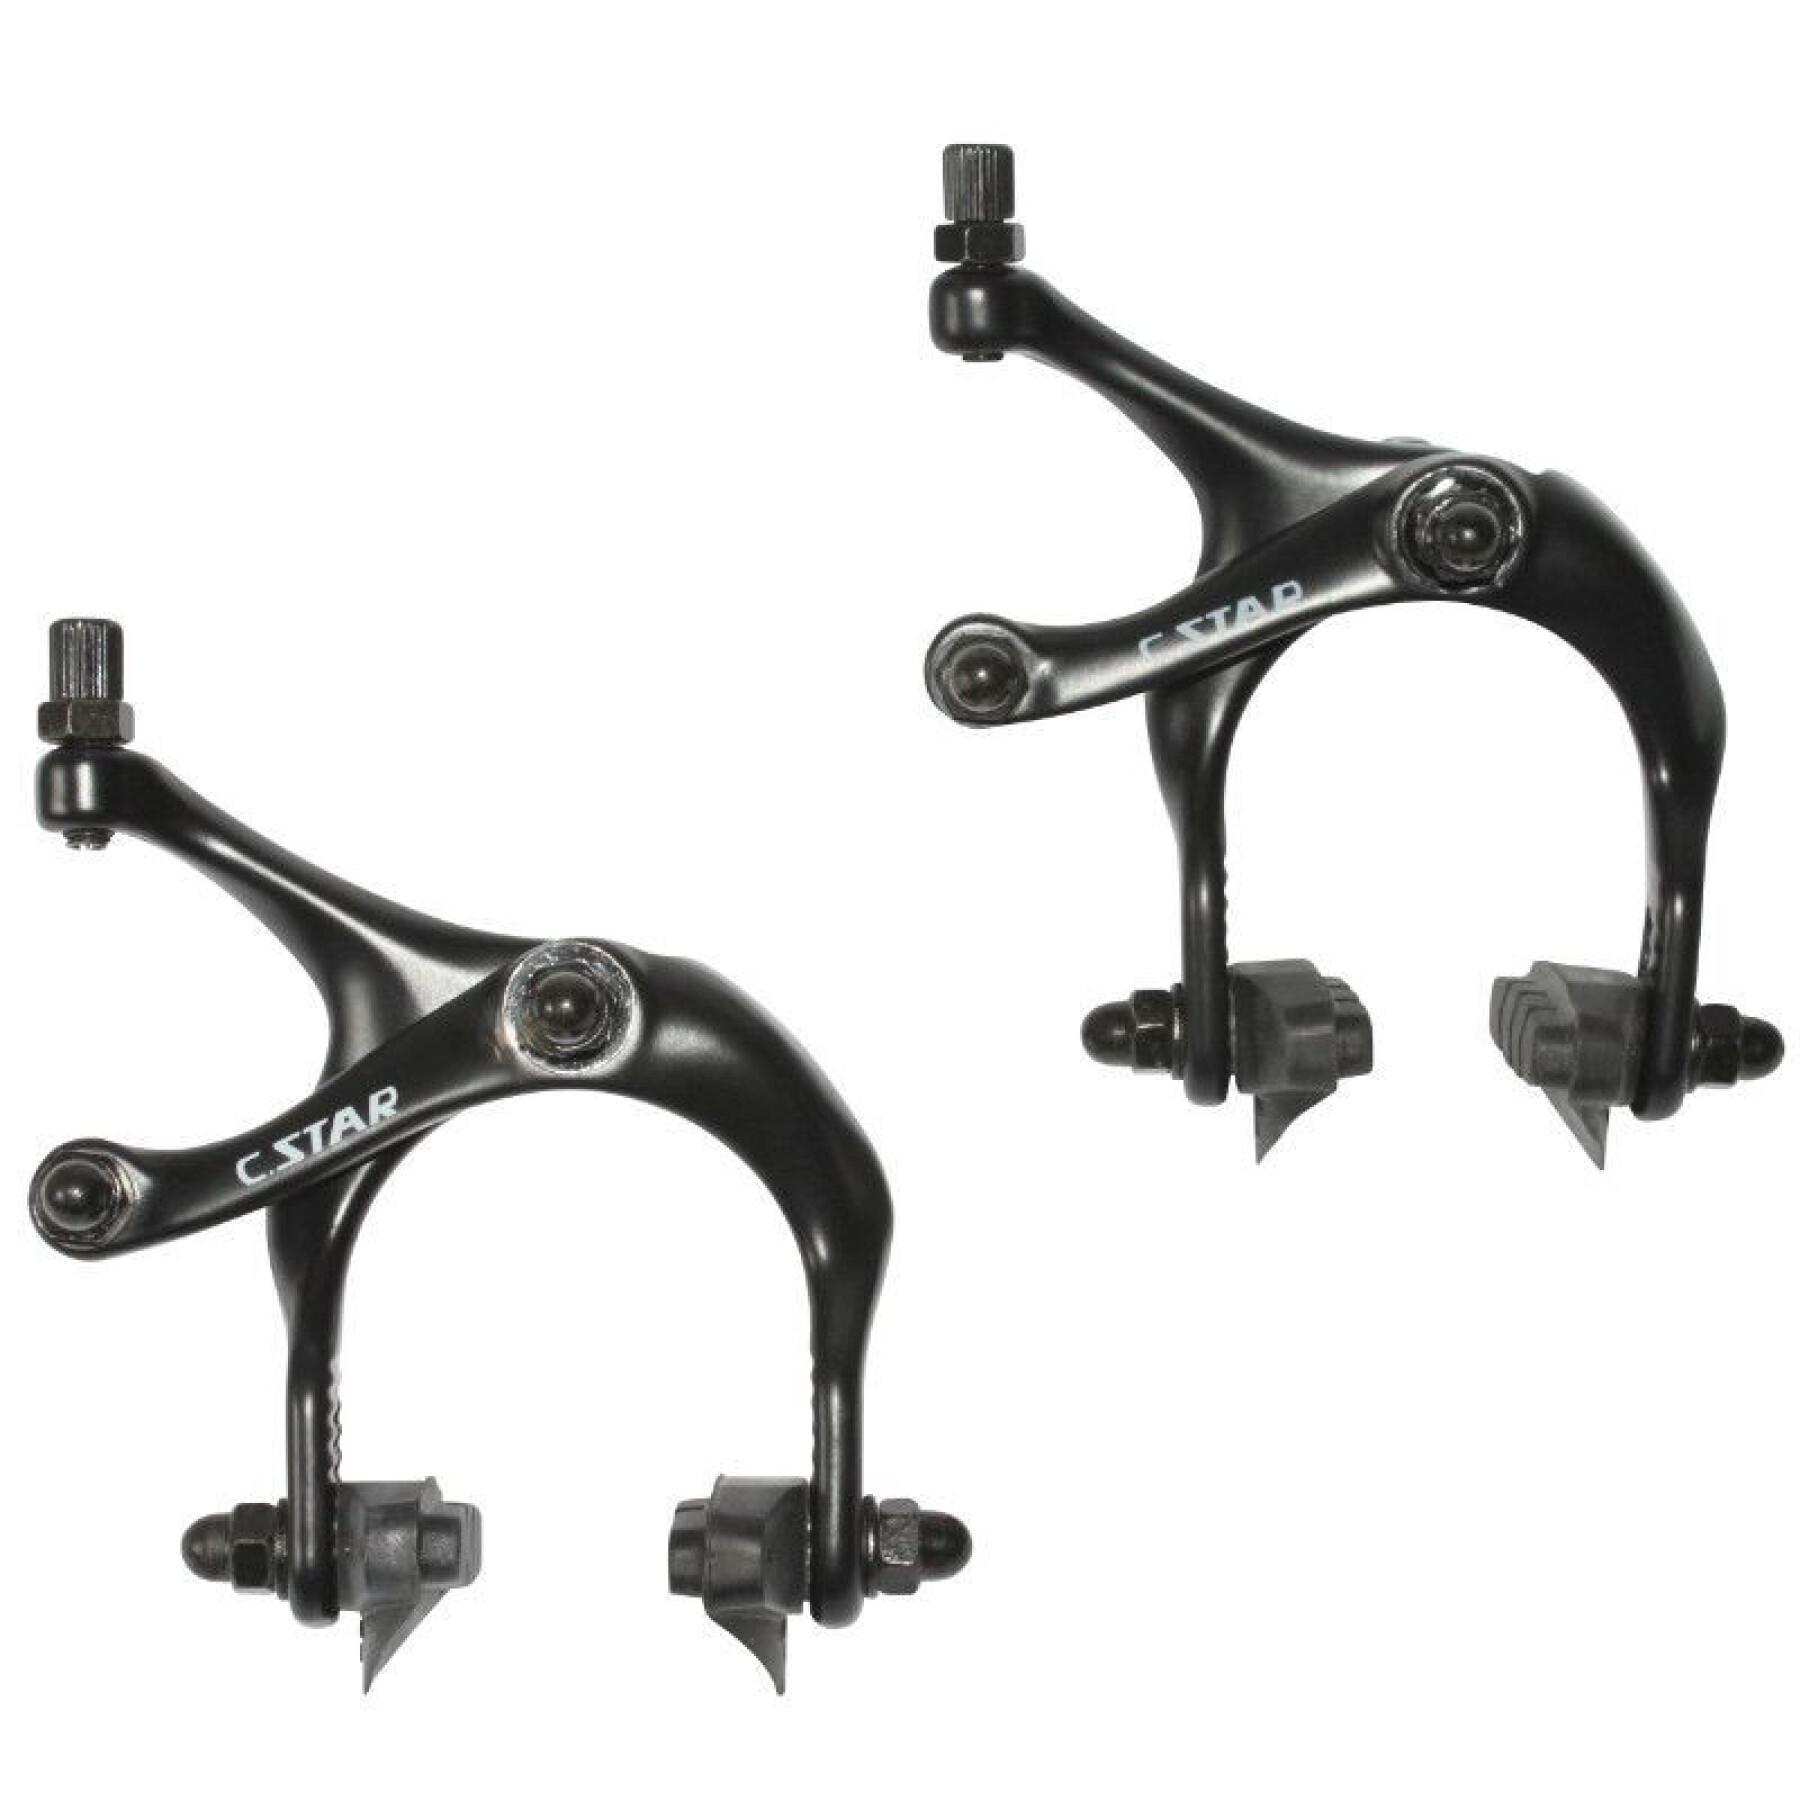 Pair of anodized aluminum road-fixie brake calipers for wheels Newton 700